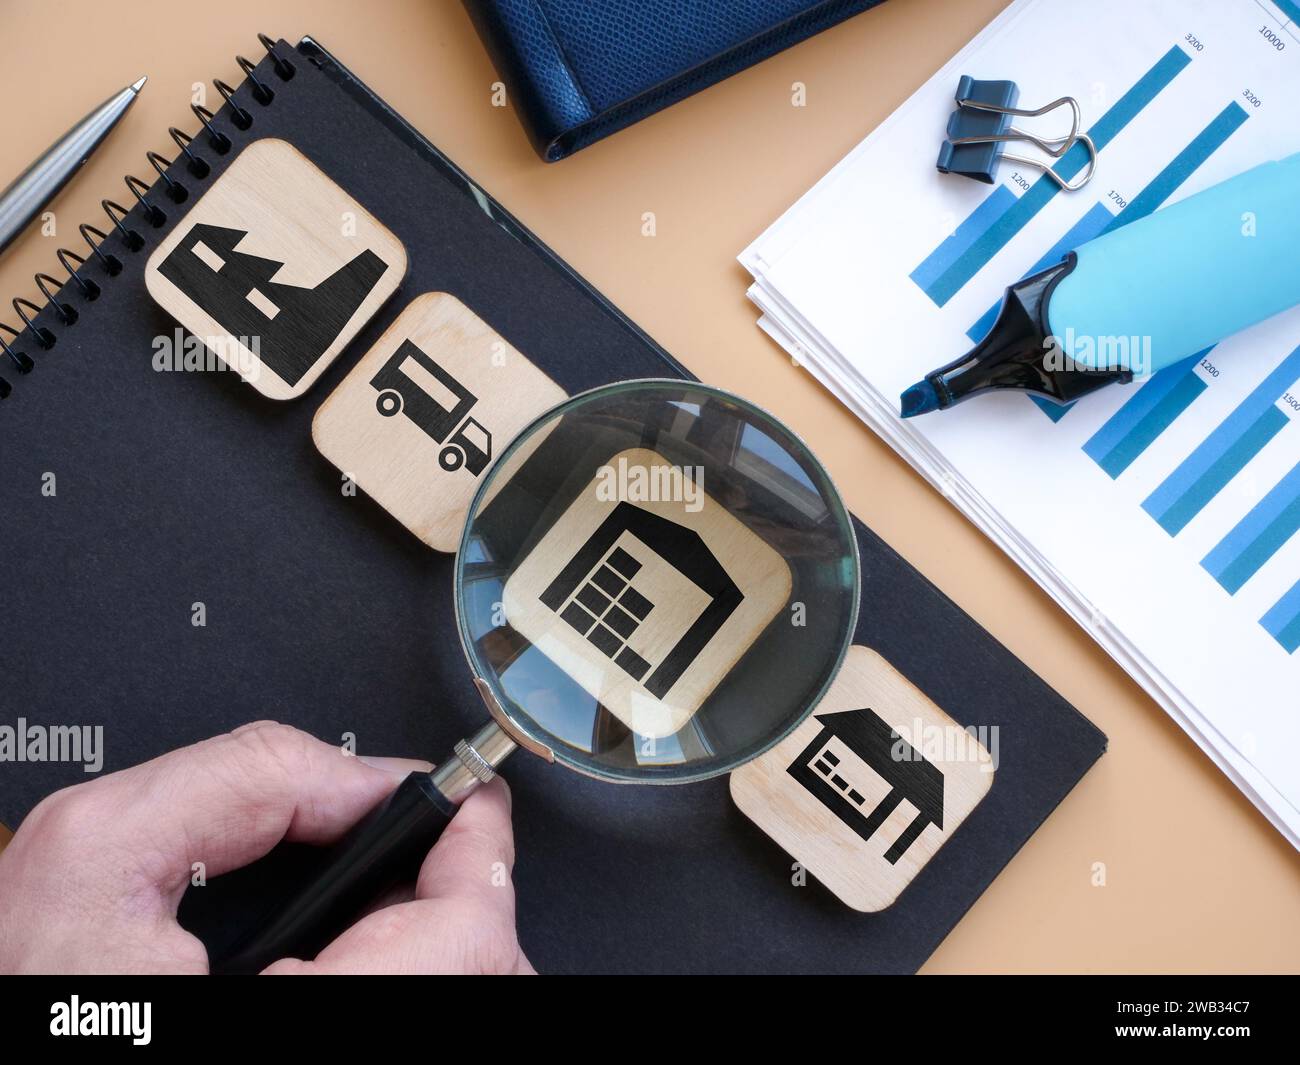 Product supply chain and warehouse. Hand holds a magnifying glass. Stock Photo